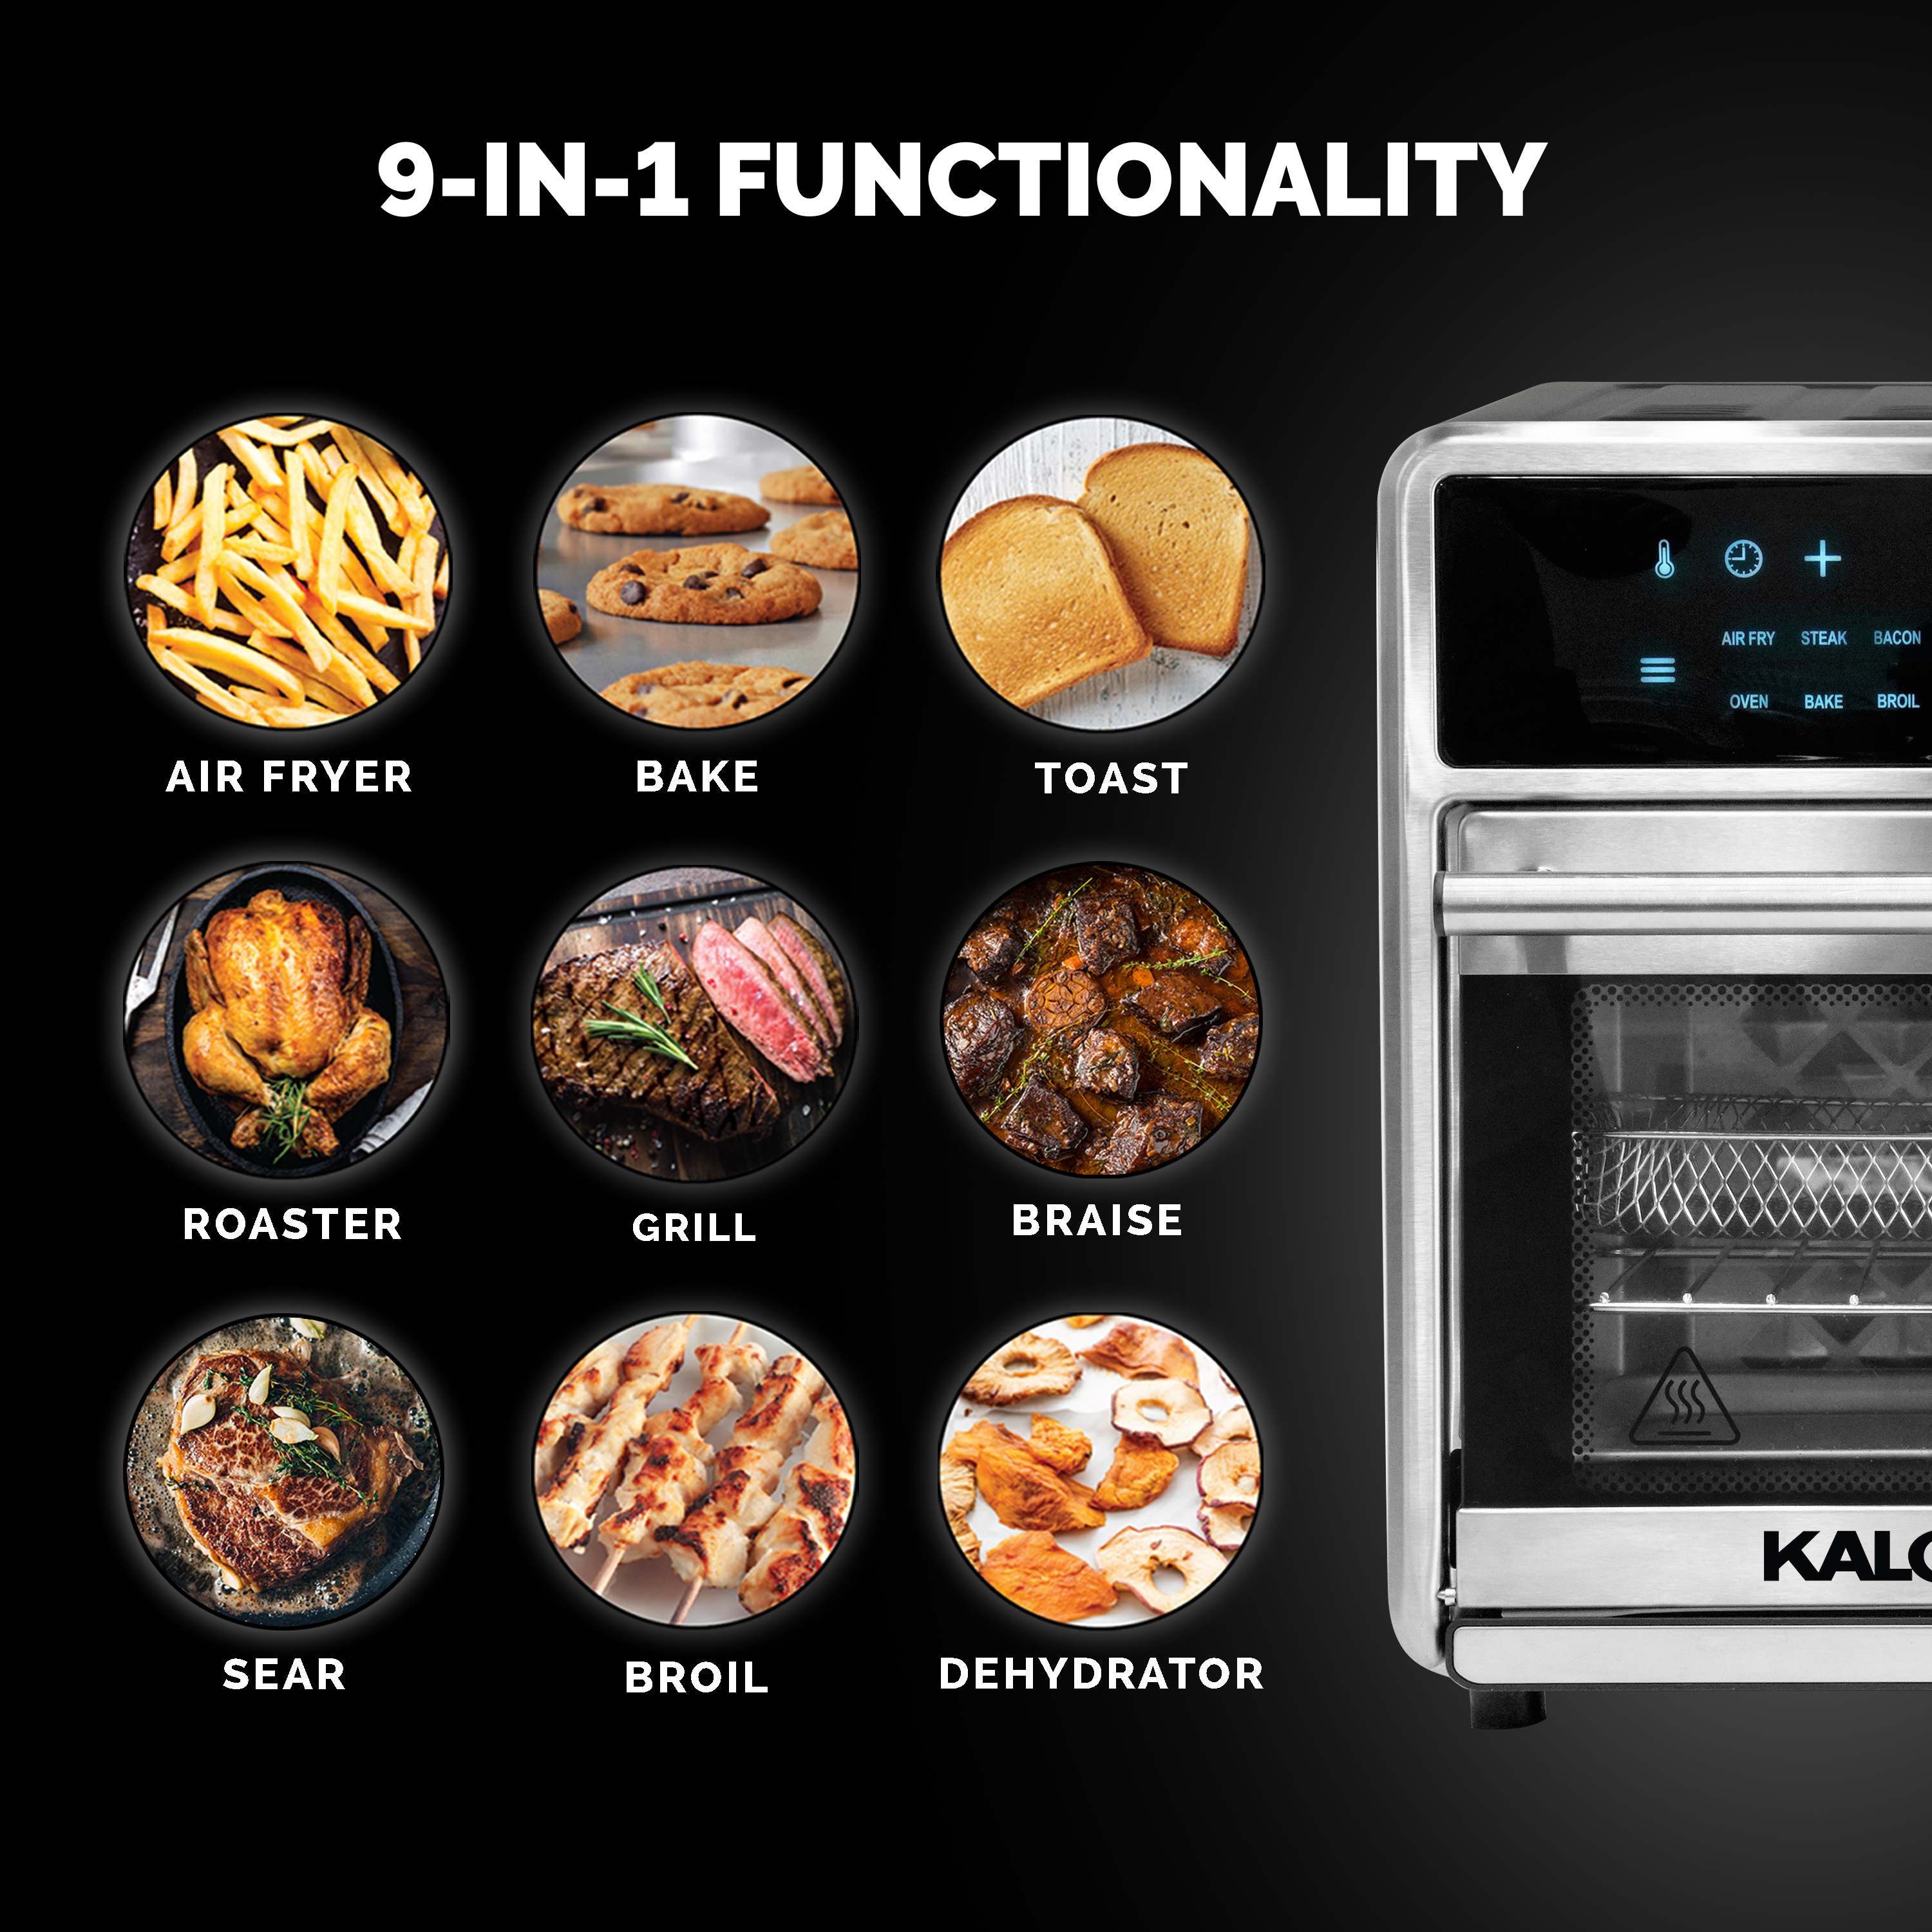 Kalorik MAXX® Touch 16 Quart Air Fryer Oven and Grill, Stainless Steel - image 5 of 11